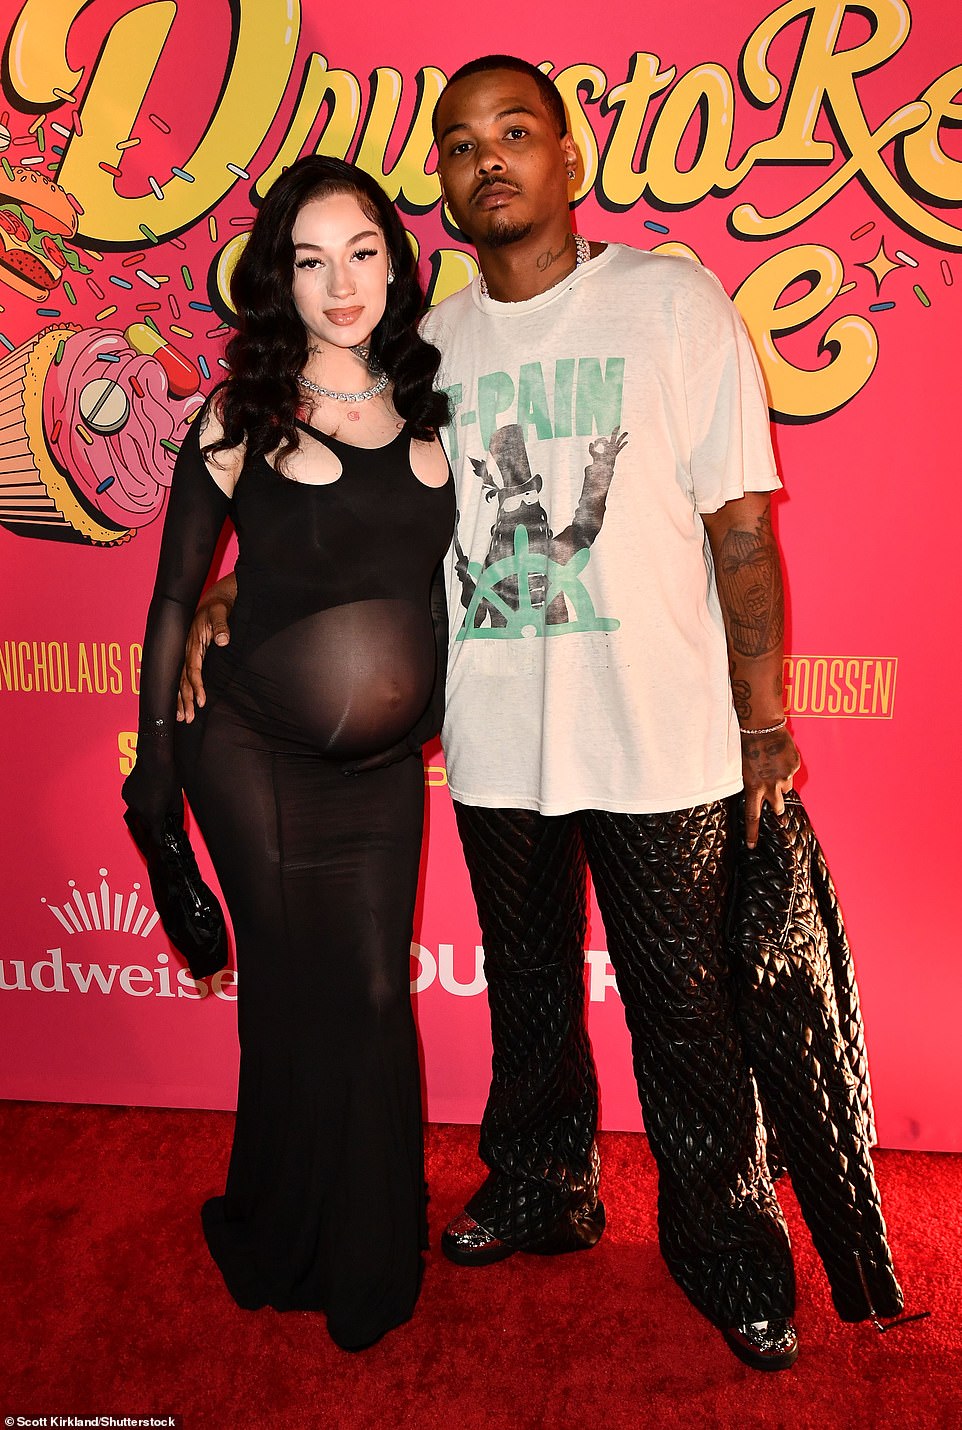 Coincidentally, writer and Drugstore June star Esther Povitsky (right) is also pregnant, so she proudly posed with Bhabie in a black minidress and knee-high boots.